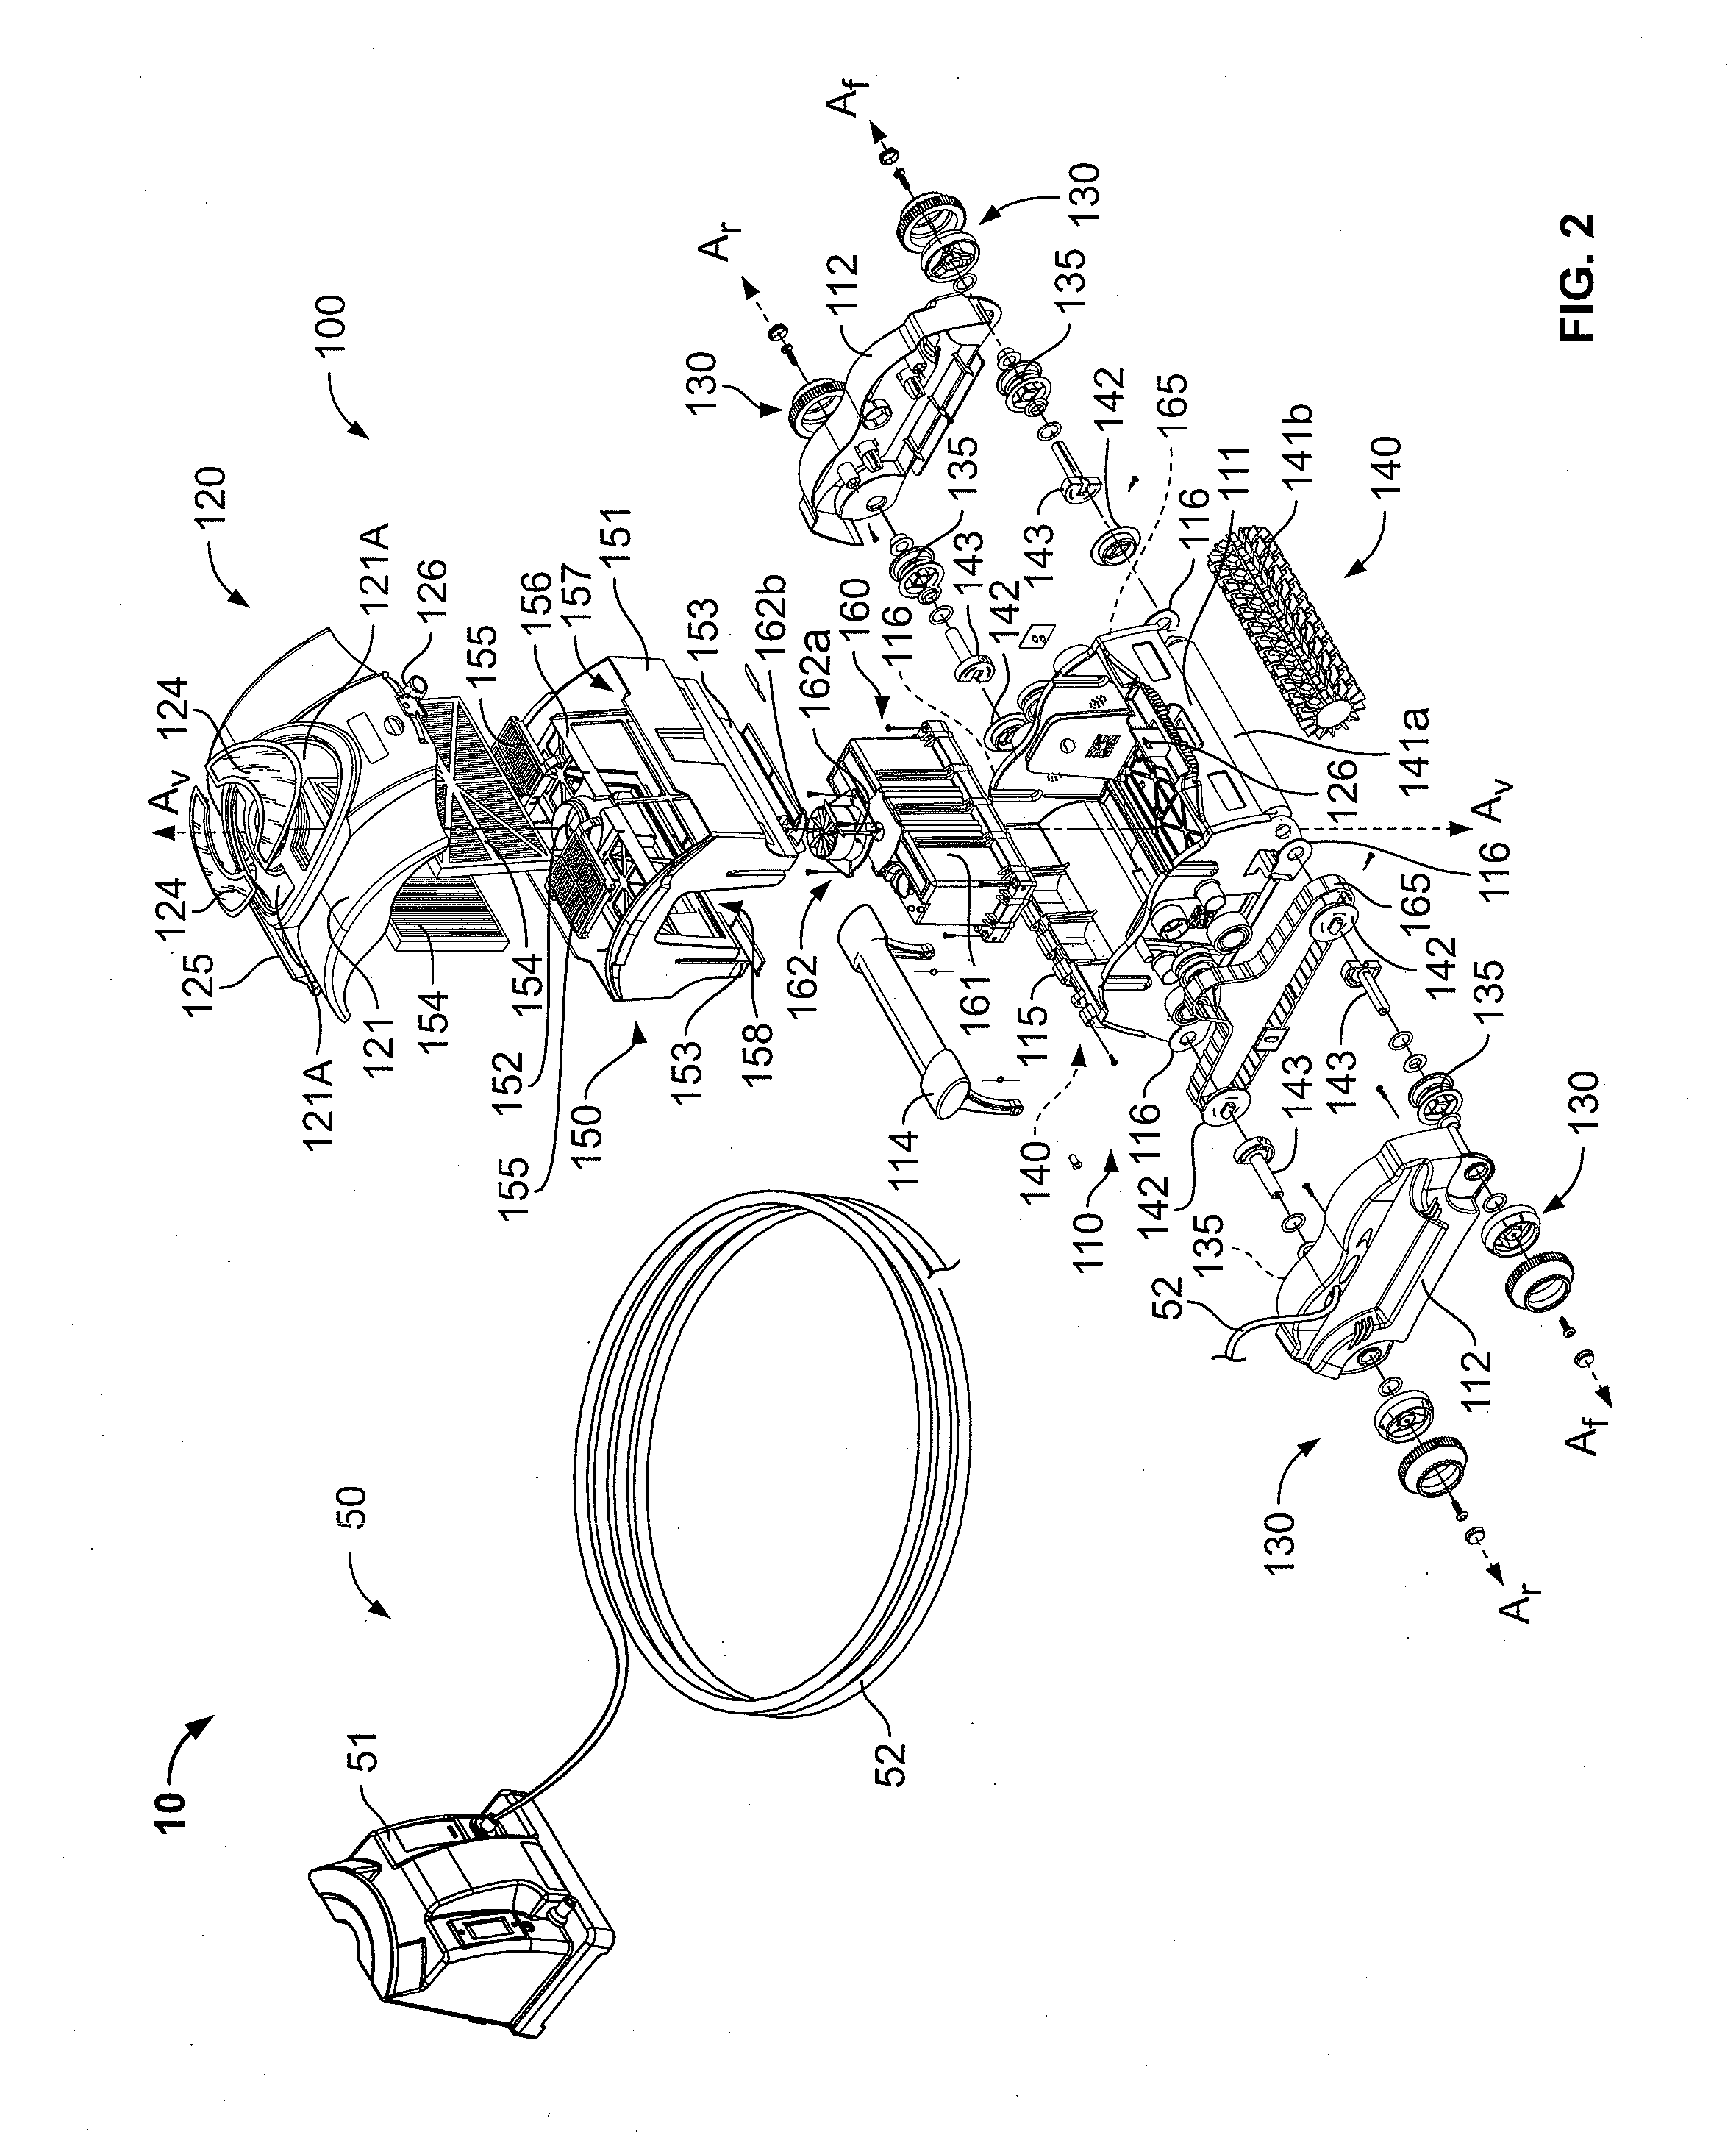 Apparatus for Facilitating Maintenance of a Pool Cleaning Device